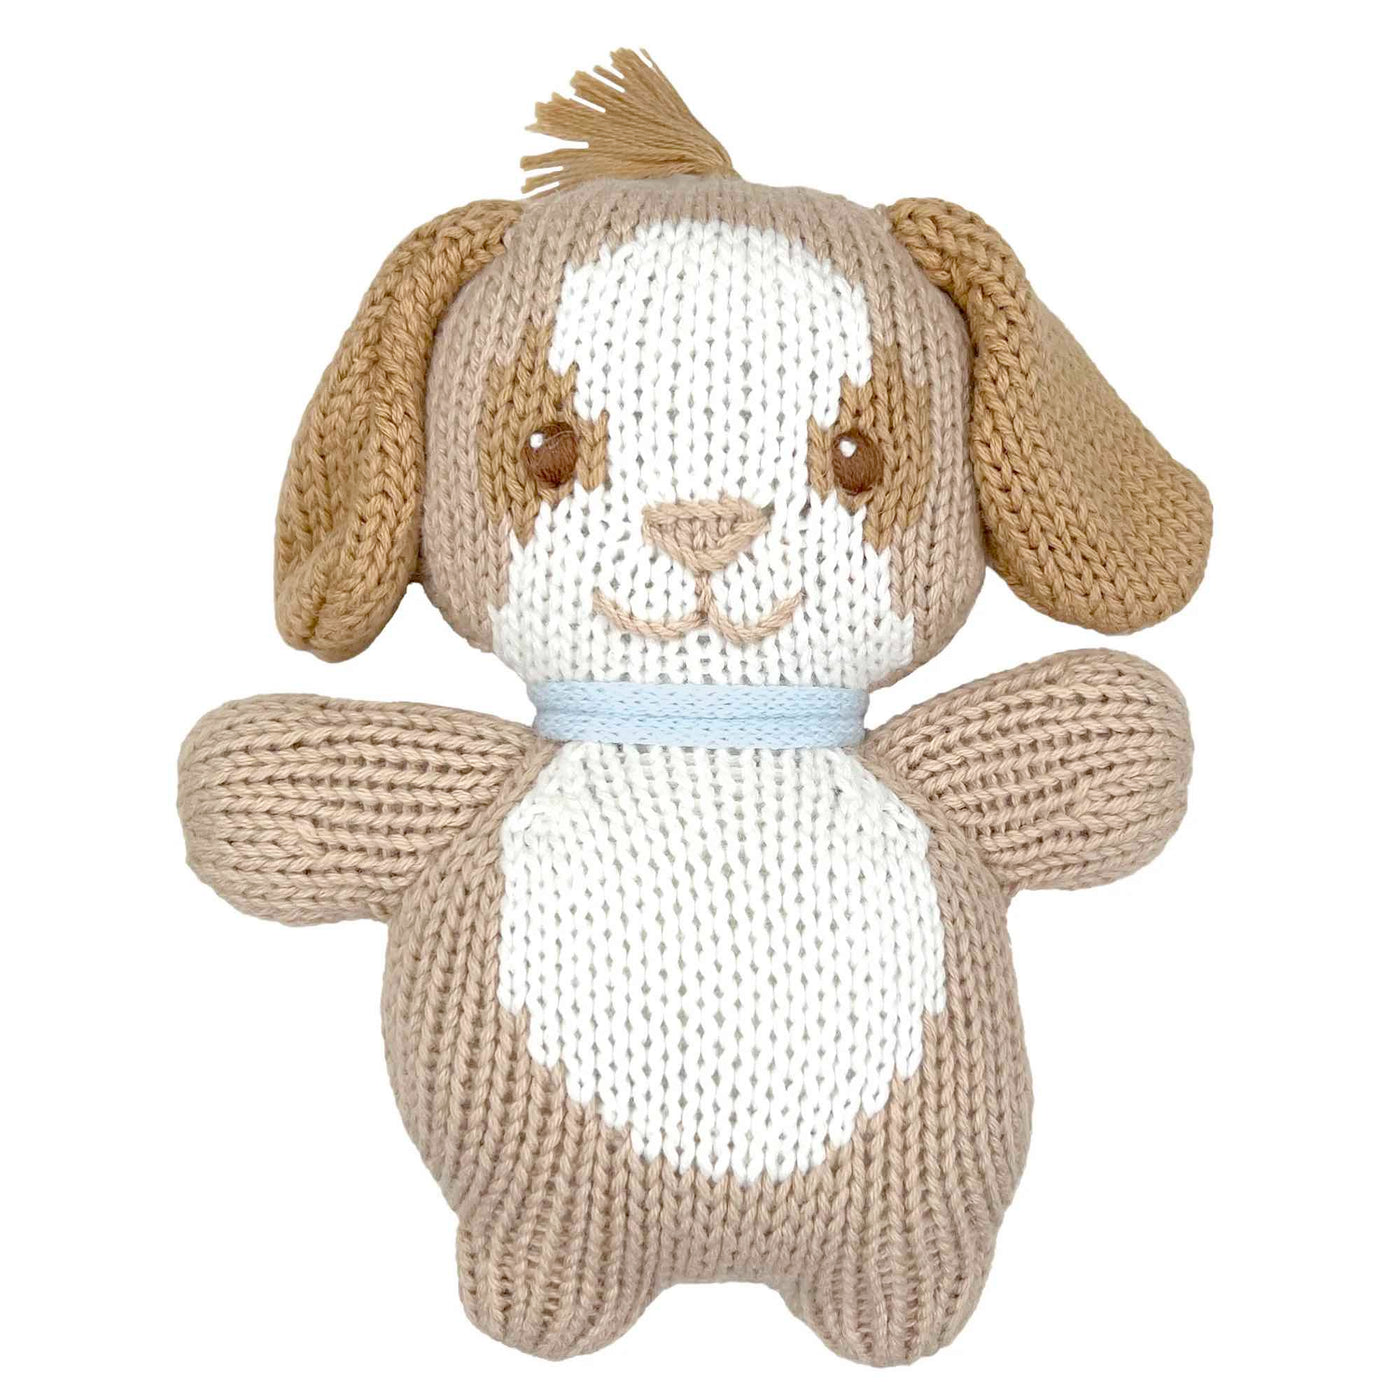 Scoops the Puppy Dog Knit Zubaby Rattle